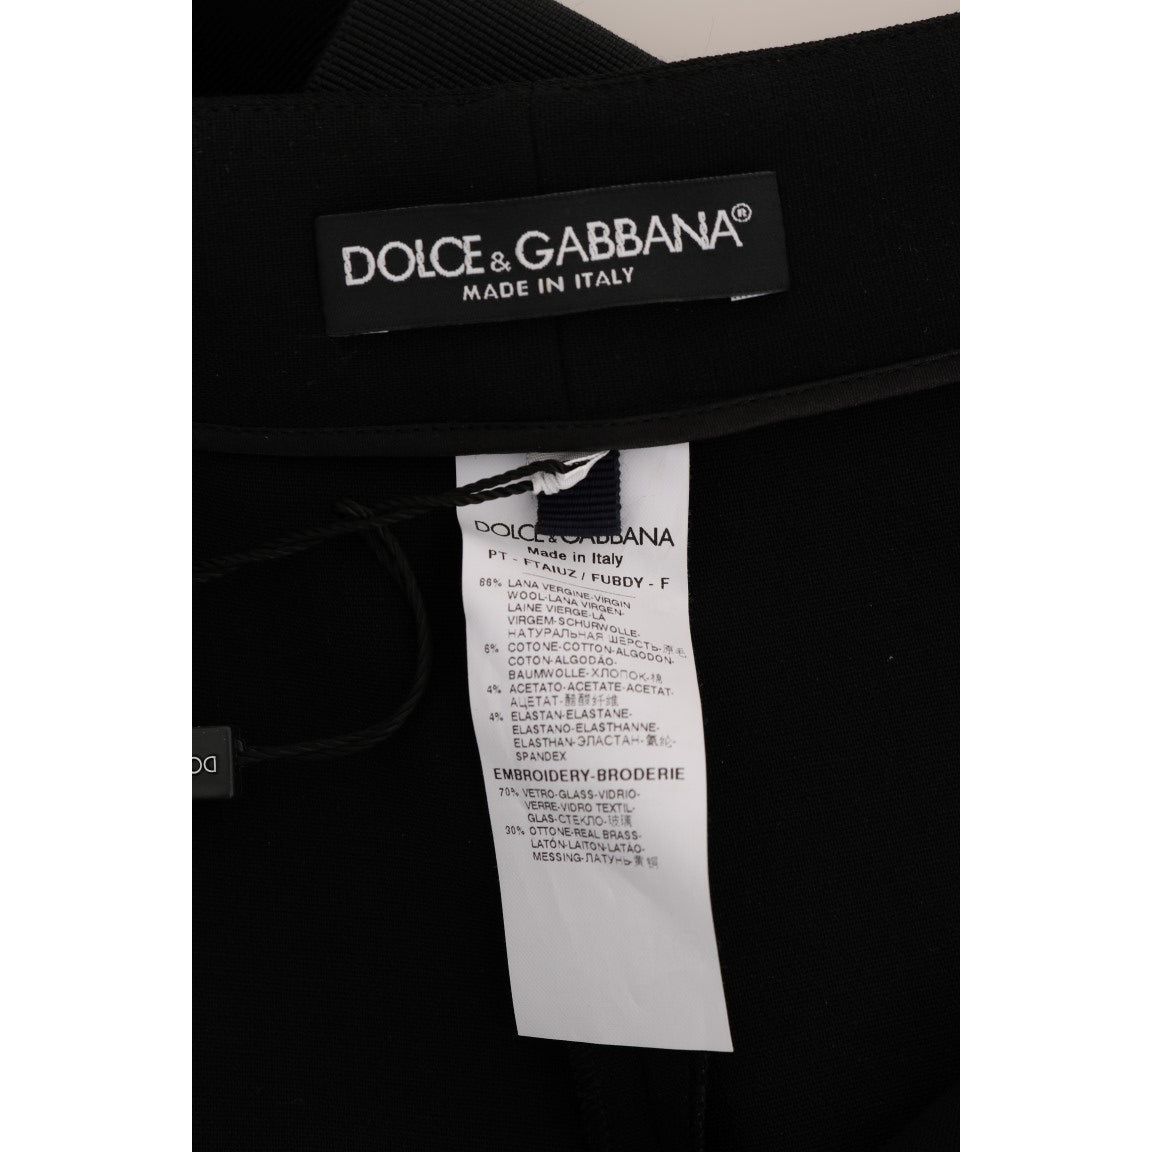 Dolce & Gabbana Elegant High-Waist Ankle Pants with Gold Detailing Jeans & Pants black-wool-stretch-crystal-pants 513120-black-wool-stretch-crystal-pants-6.jpg